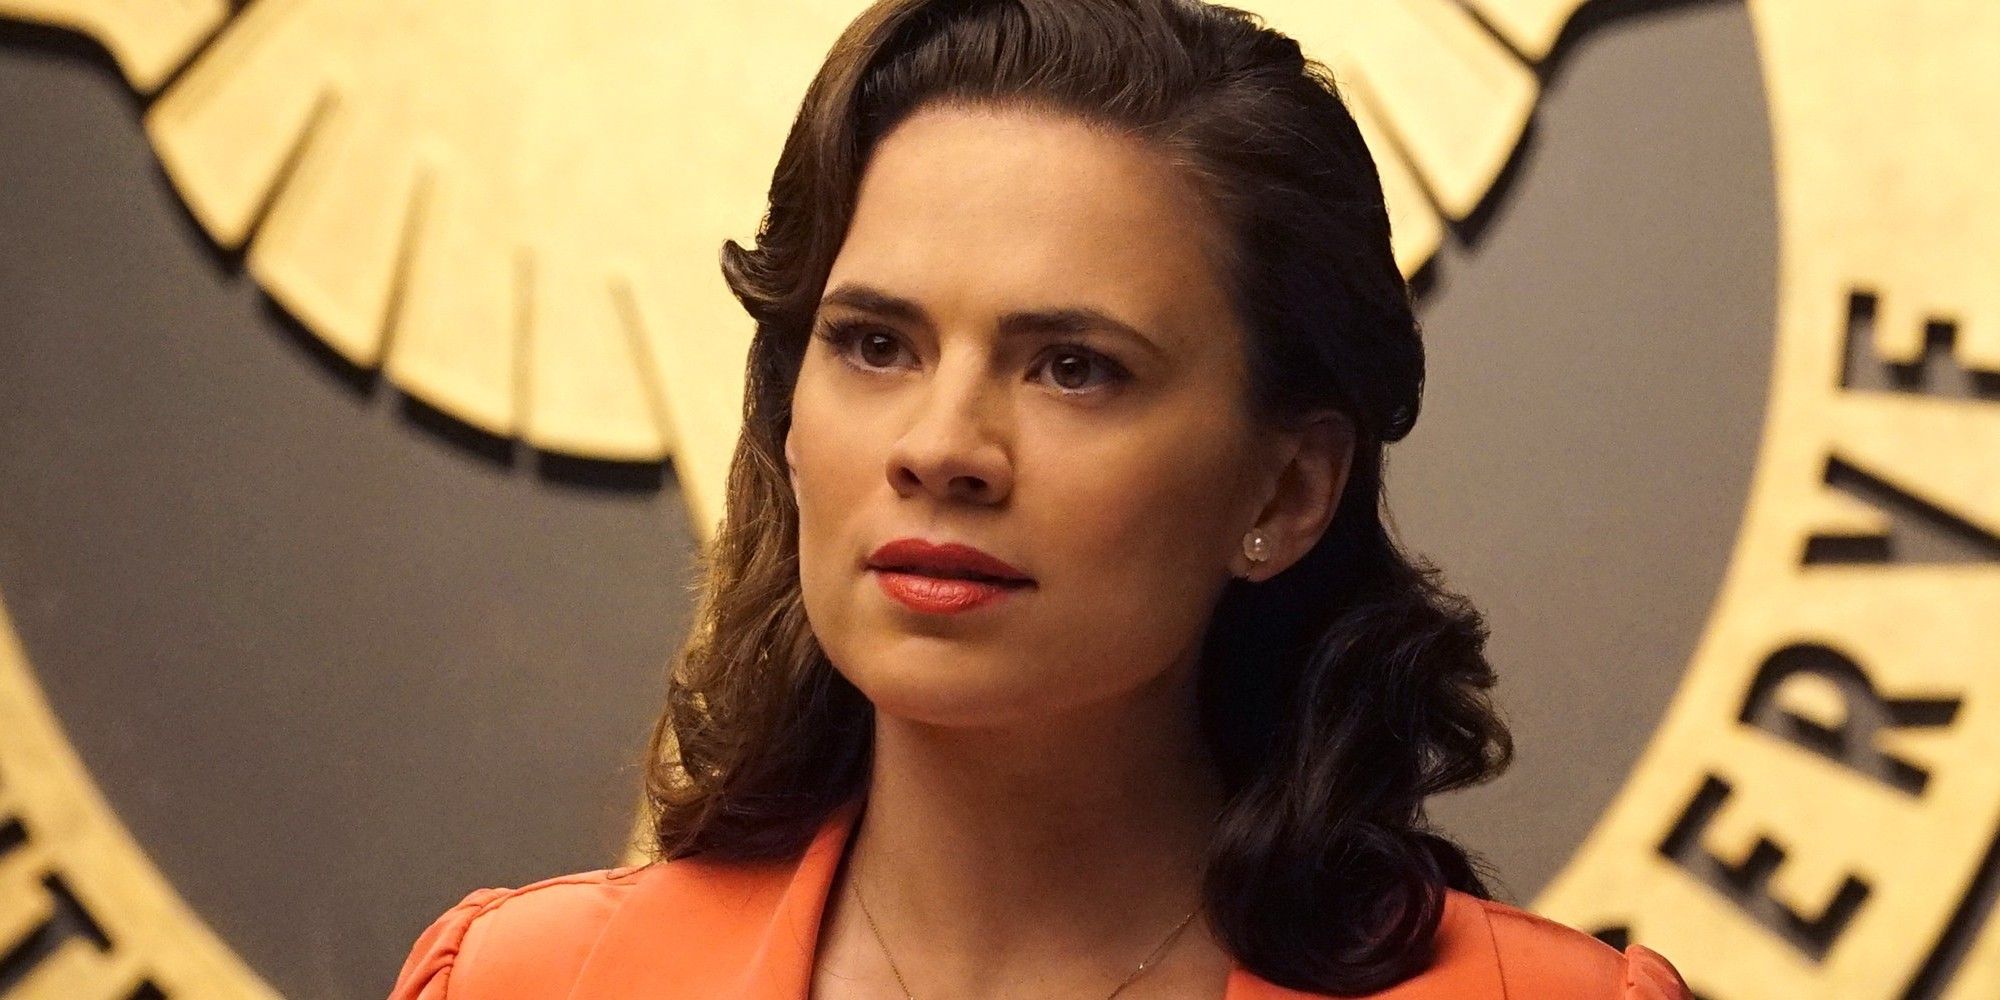 Agent Carter from the TV series